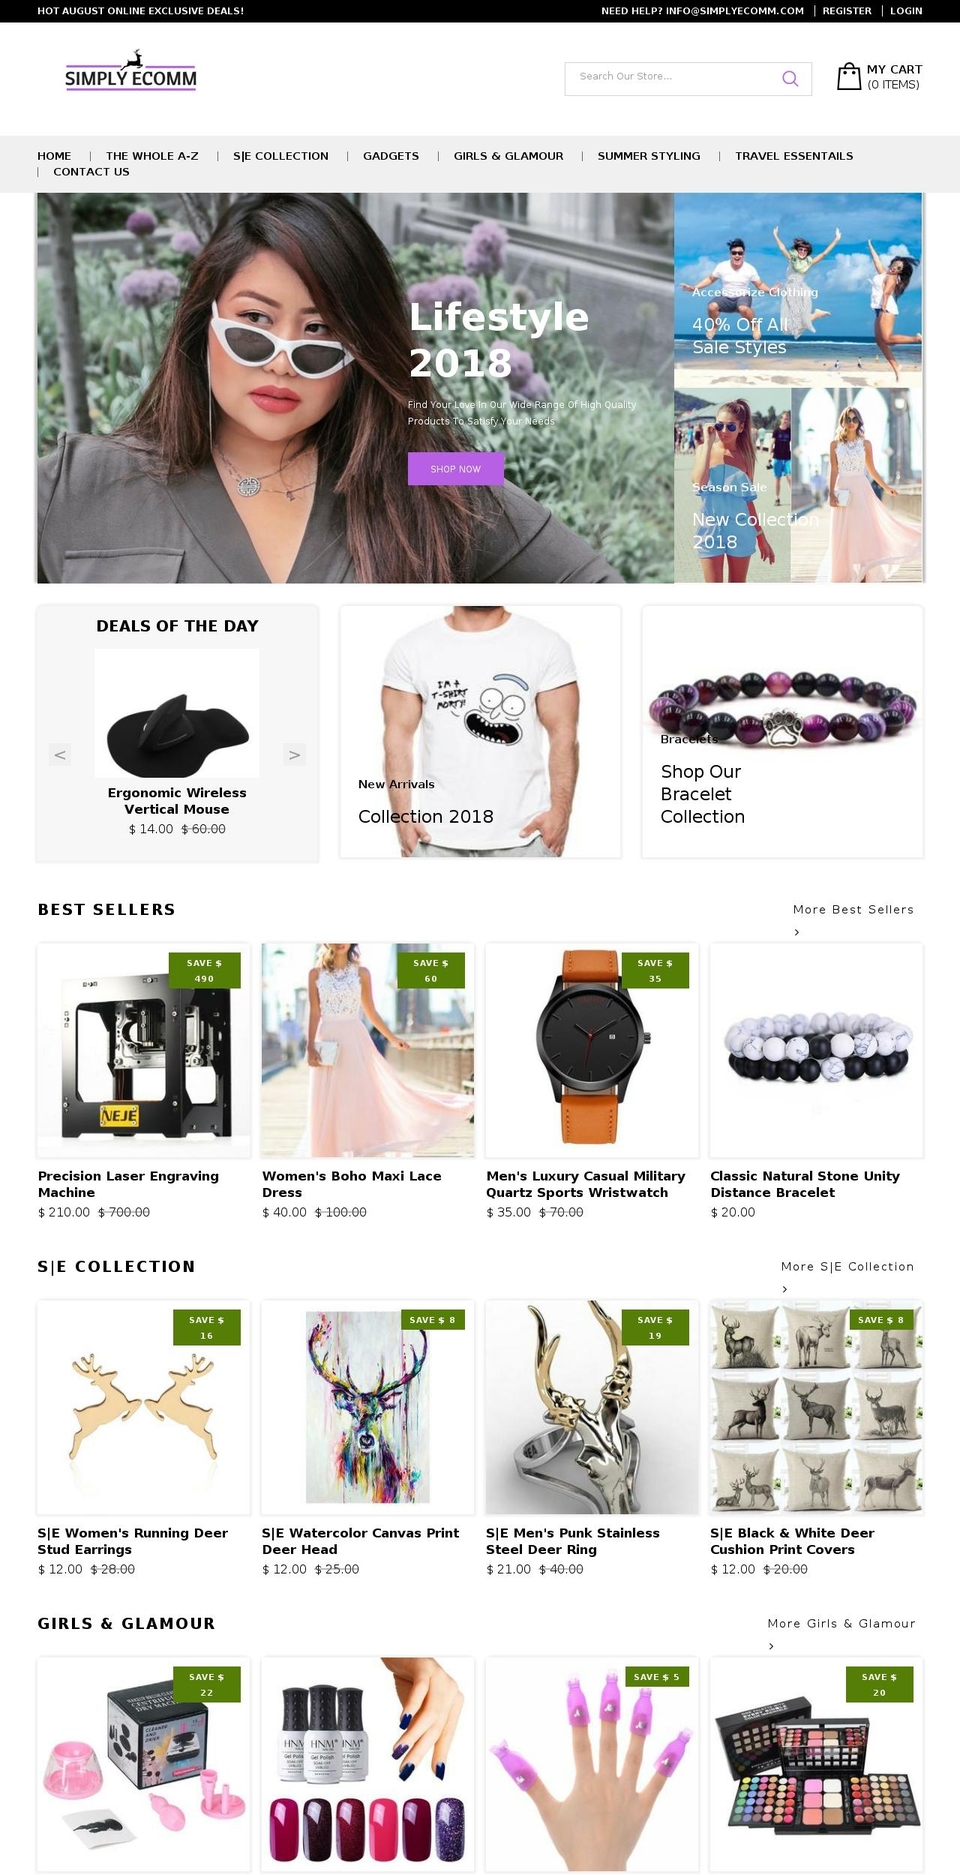 Drop Shopify theme site example simplyecomm.com